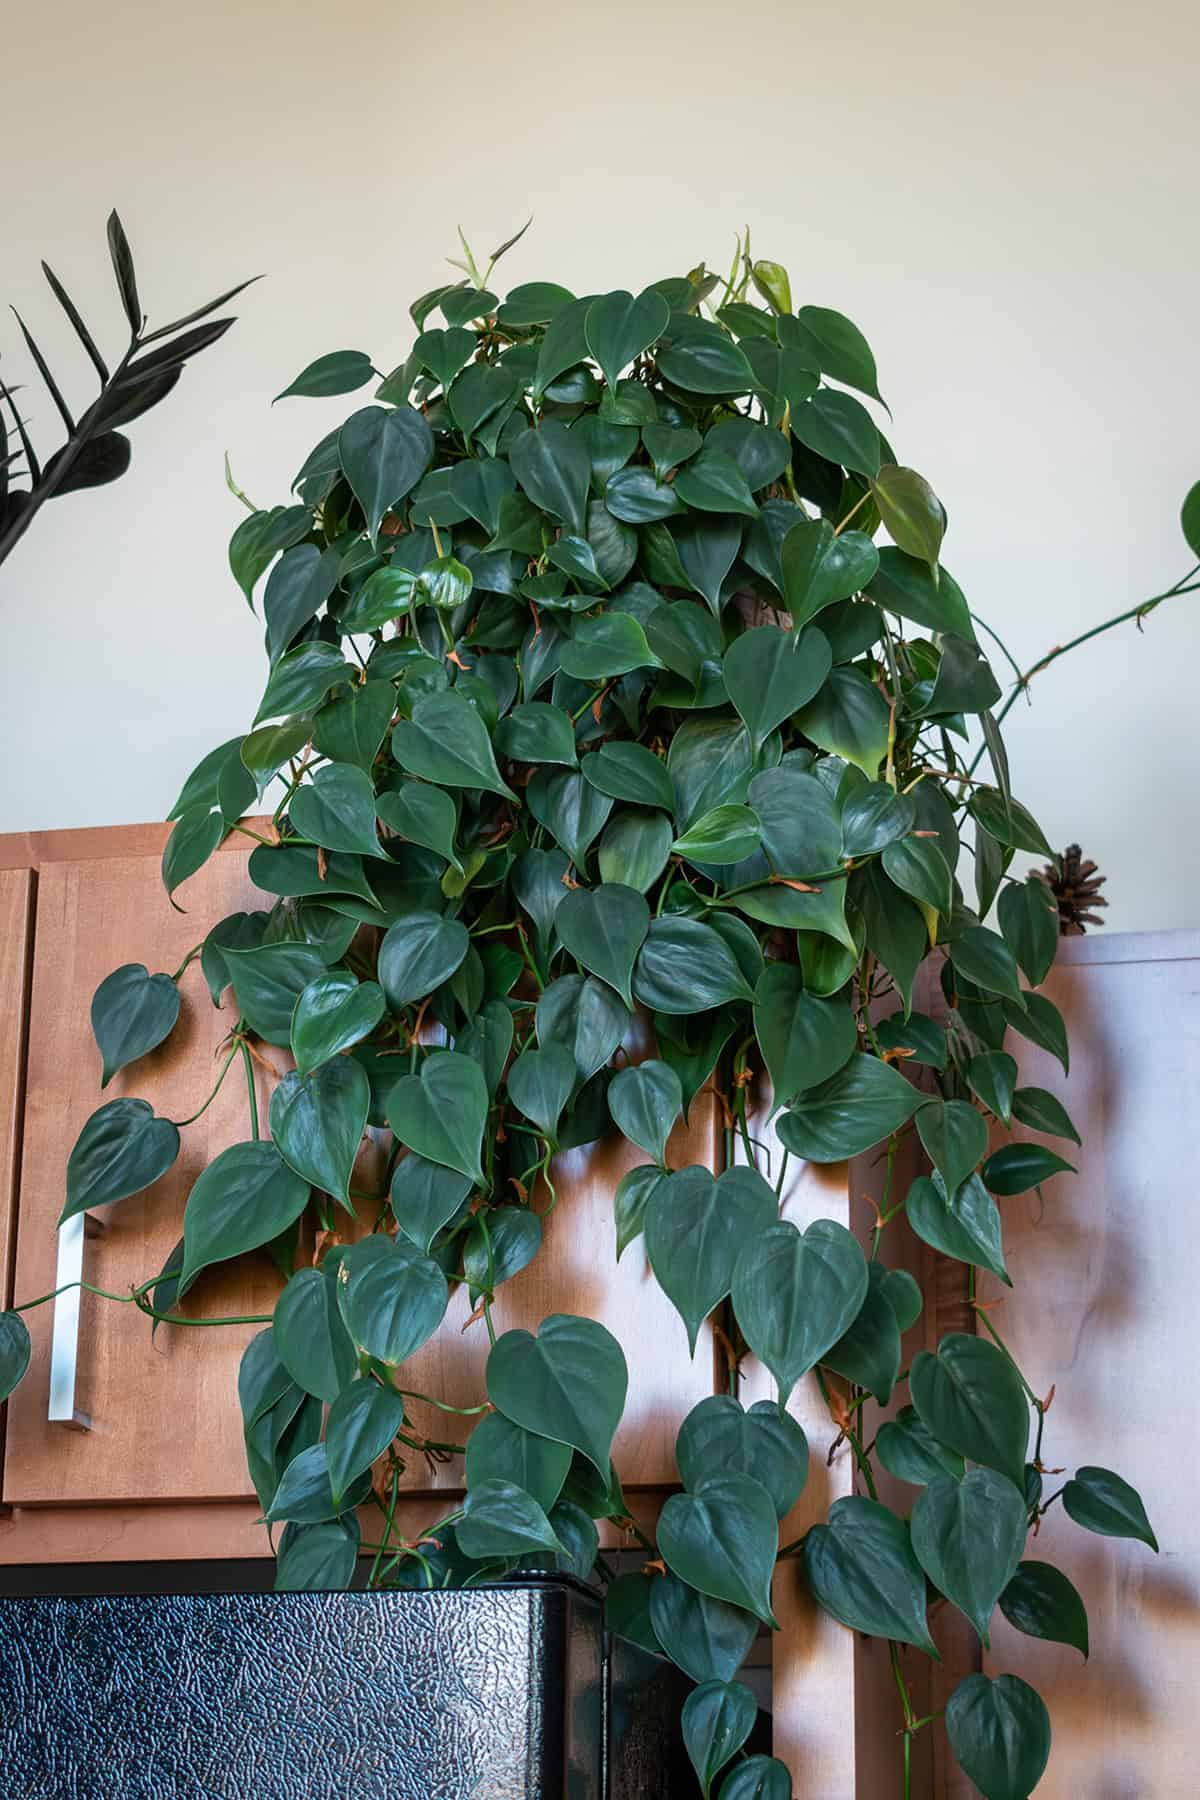 Heartleaf Philodendron (Philodendron Hederaceum)